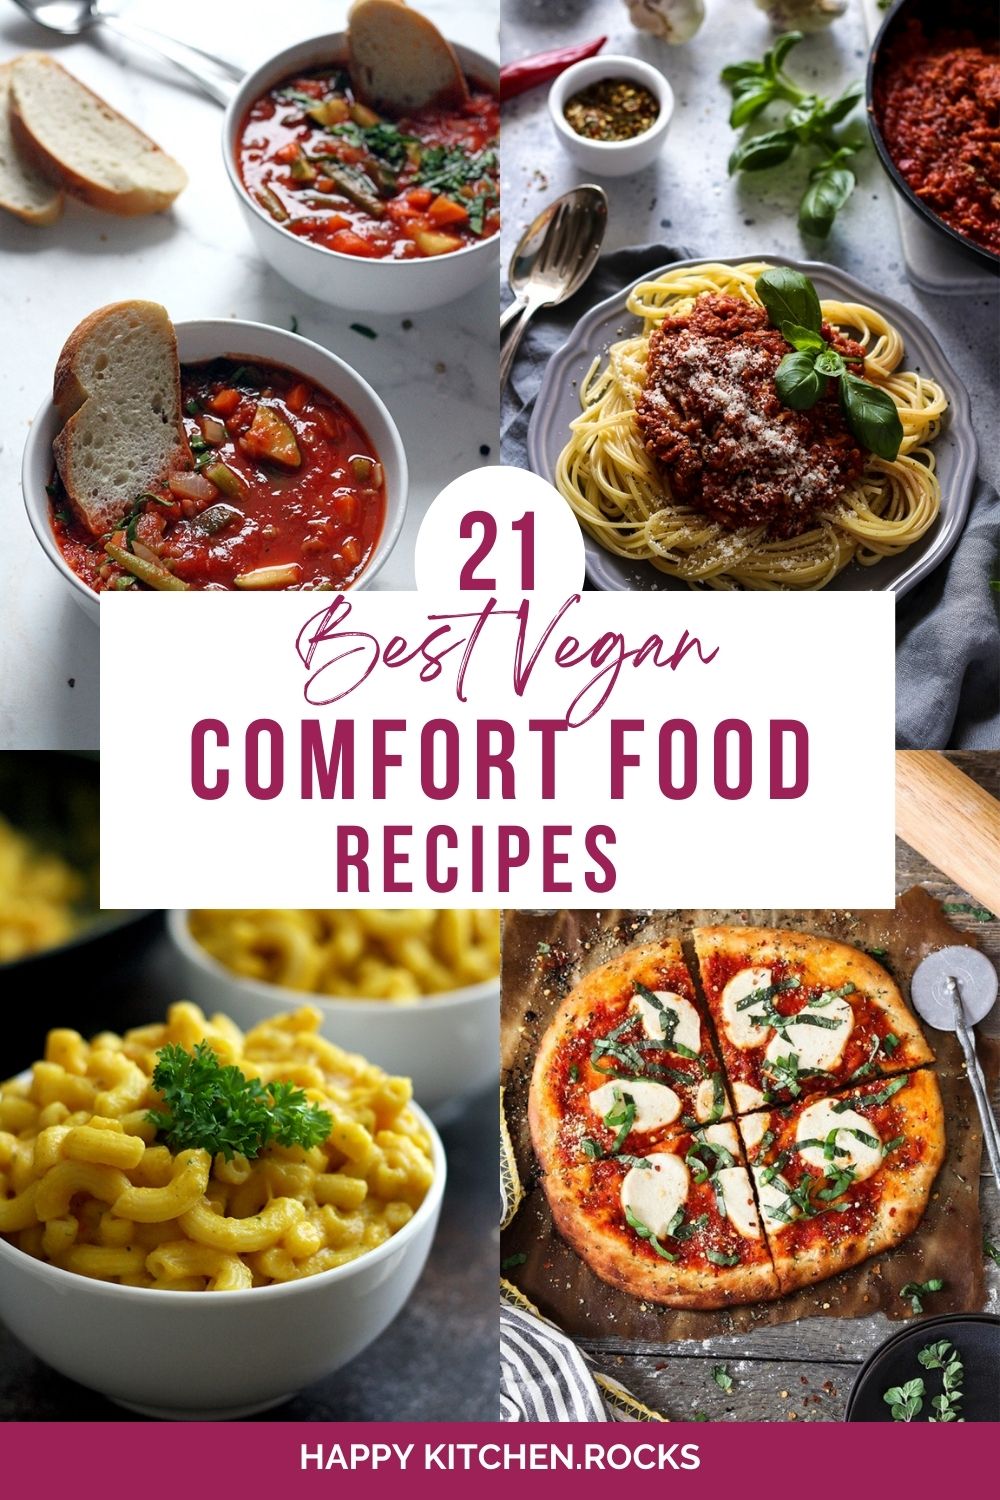 Vegan Comfort Food Recipes Pinterest Roundup Image Minestrone, Spaghetti Bolognese, Mac and Cheese and Vegan Pizza.